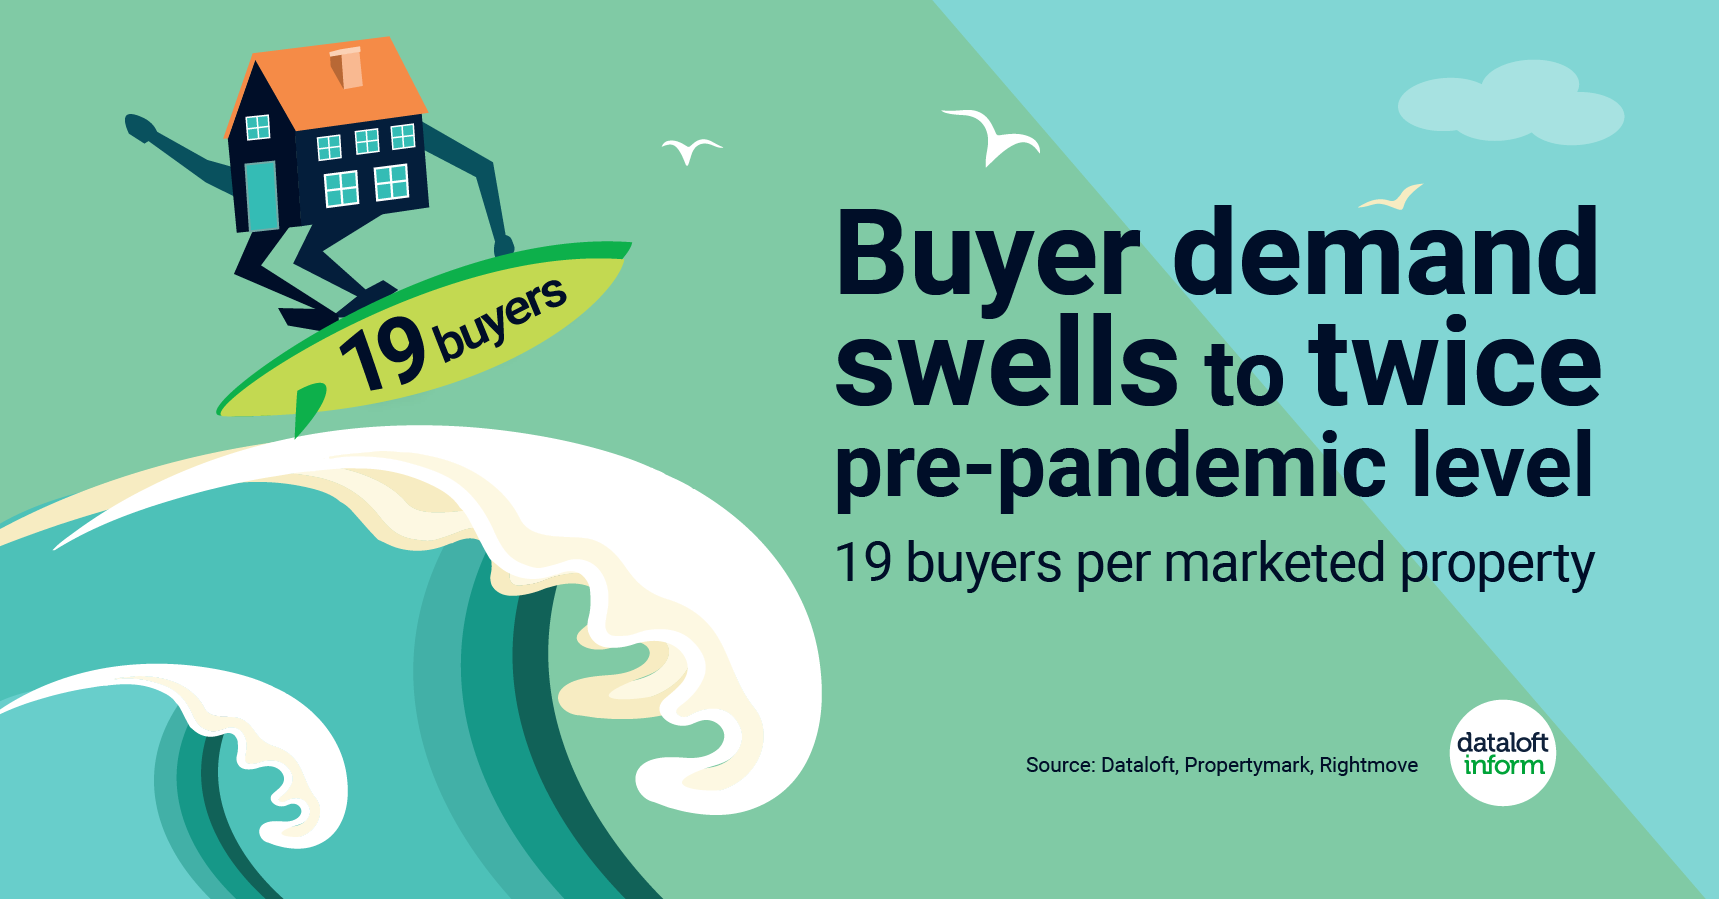 dataloft infographic showing a swell in buyer demand